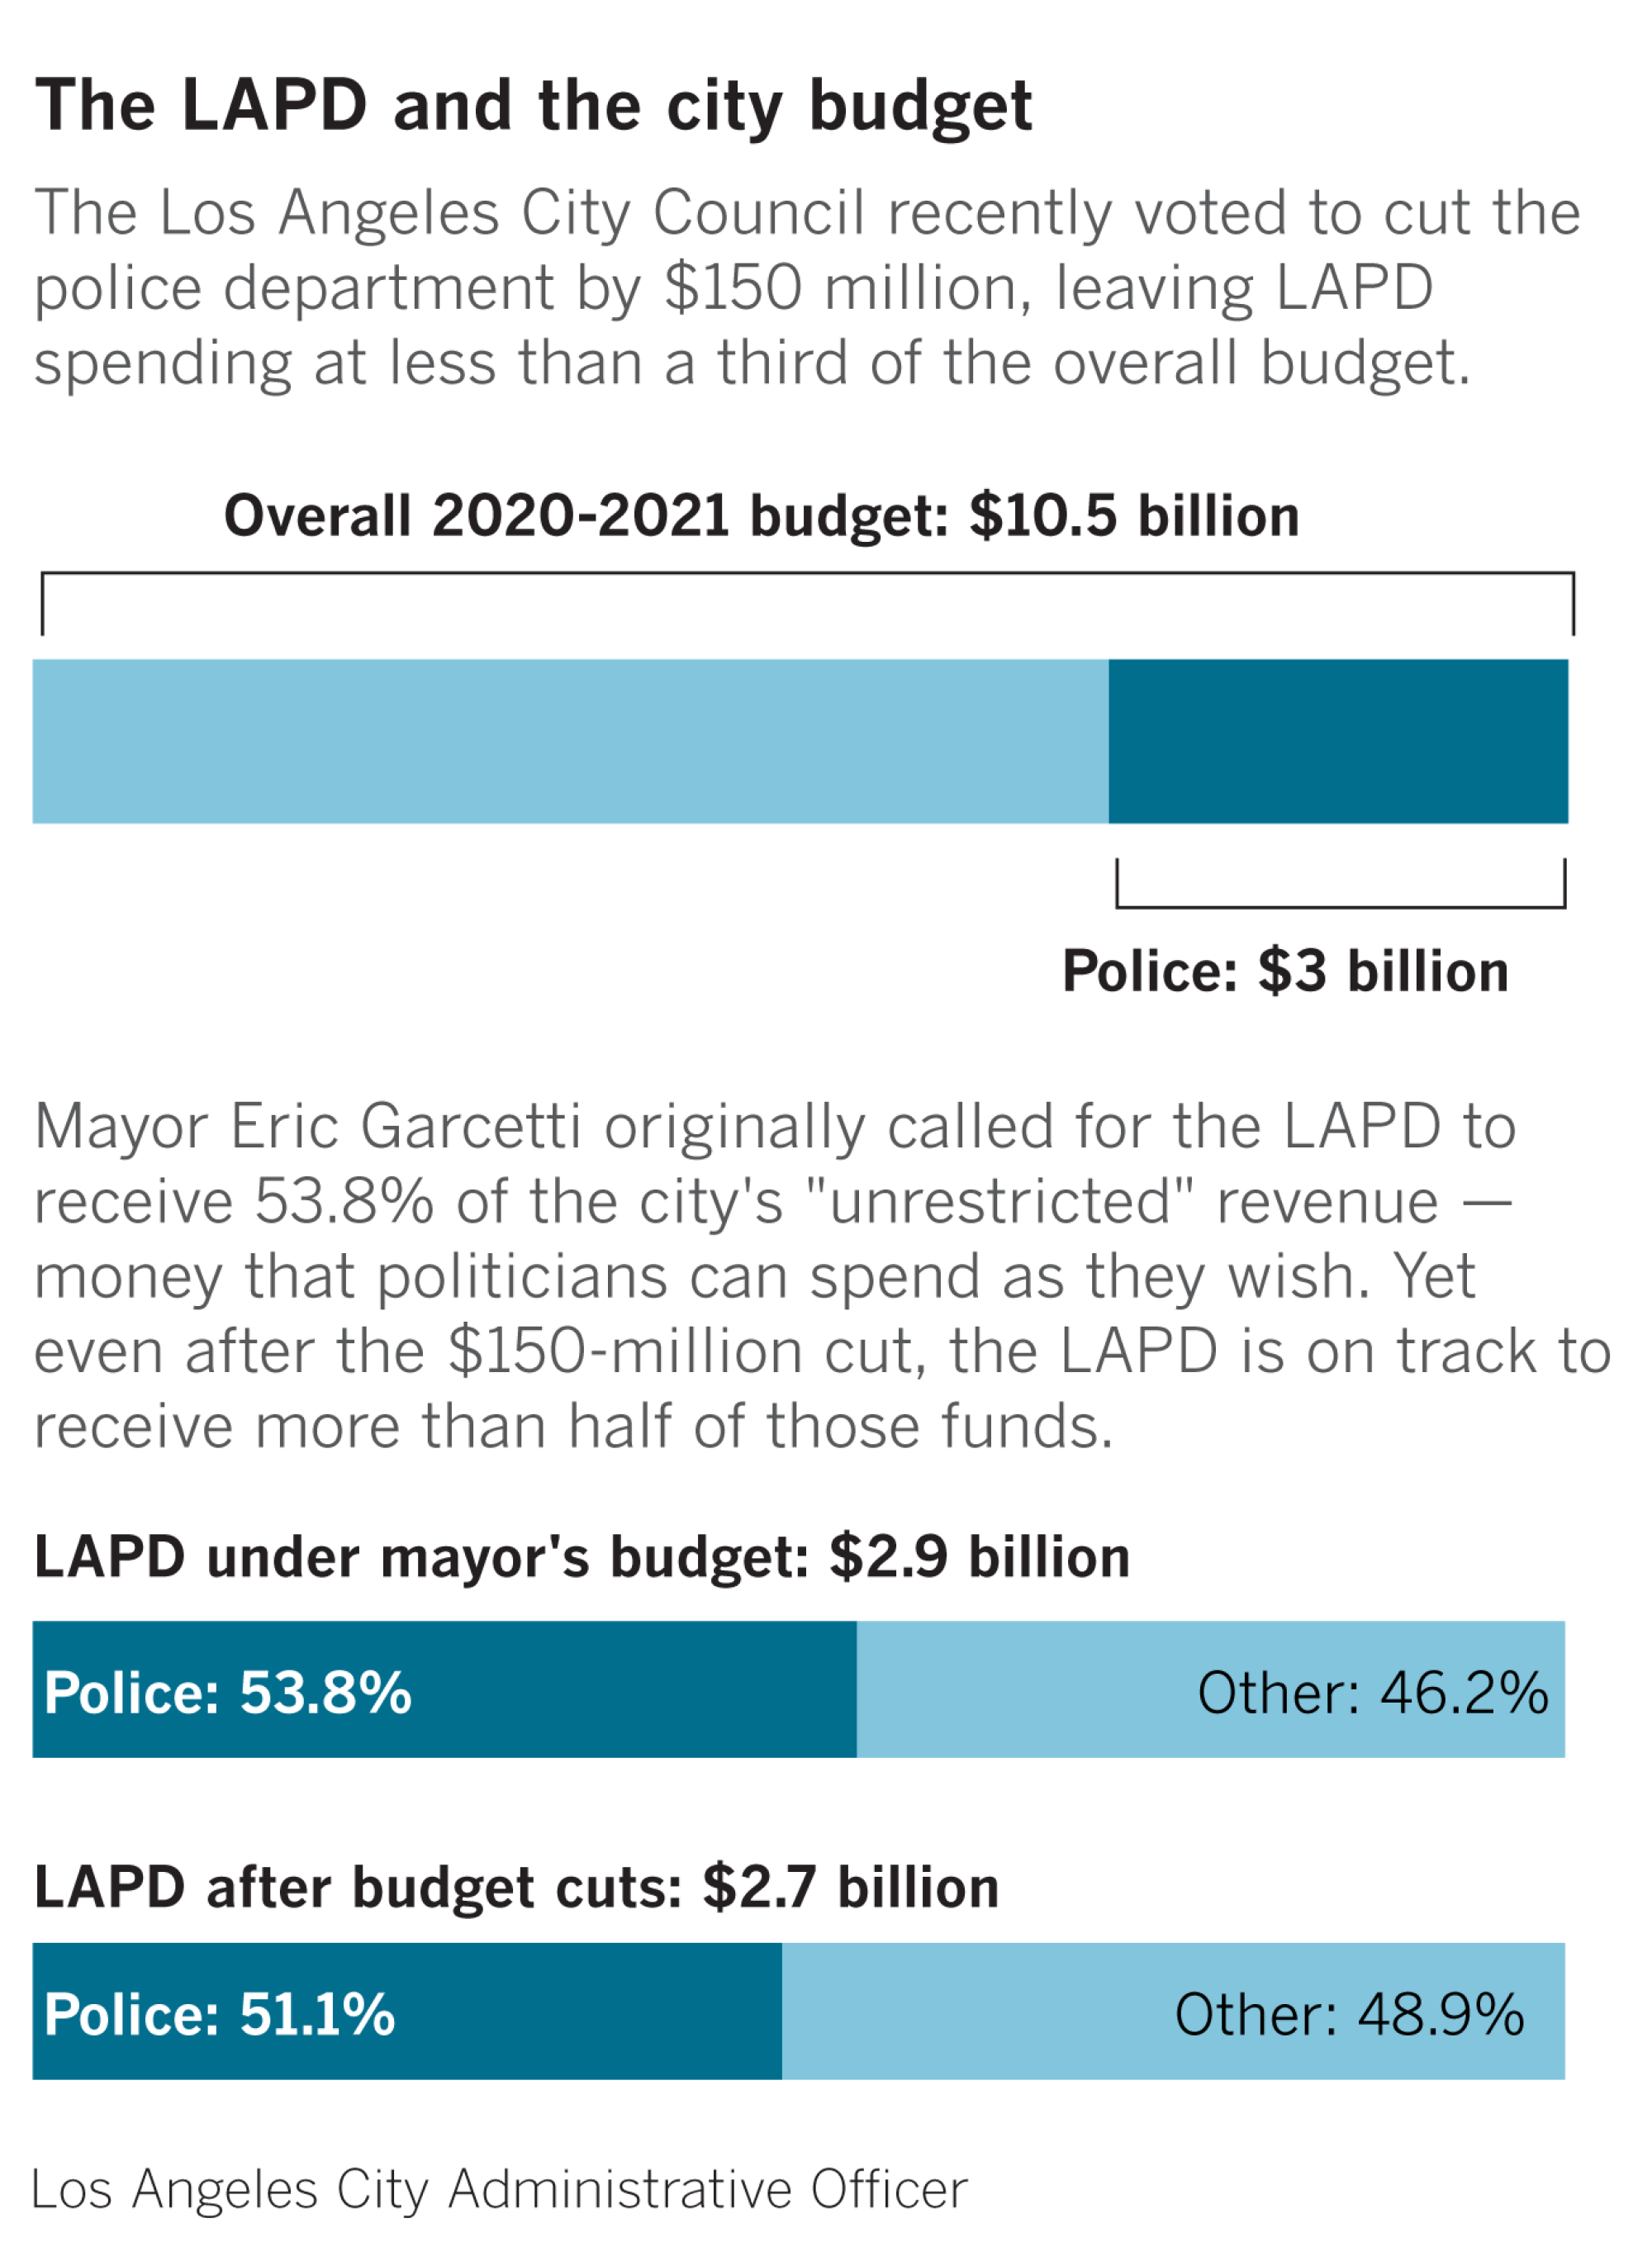 The Los Angeles City Council recently voted to cut the police department by $150 million.